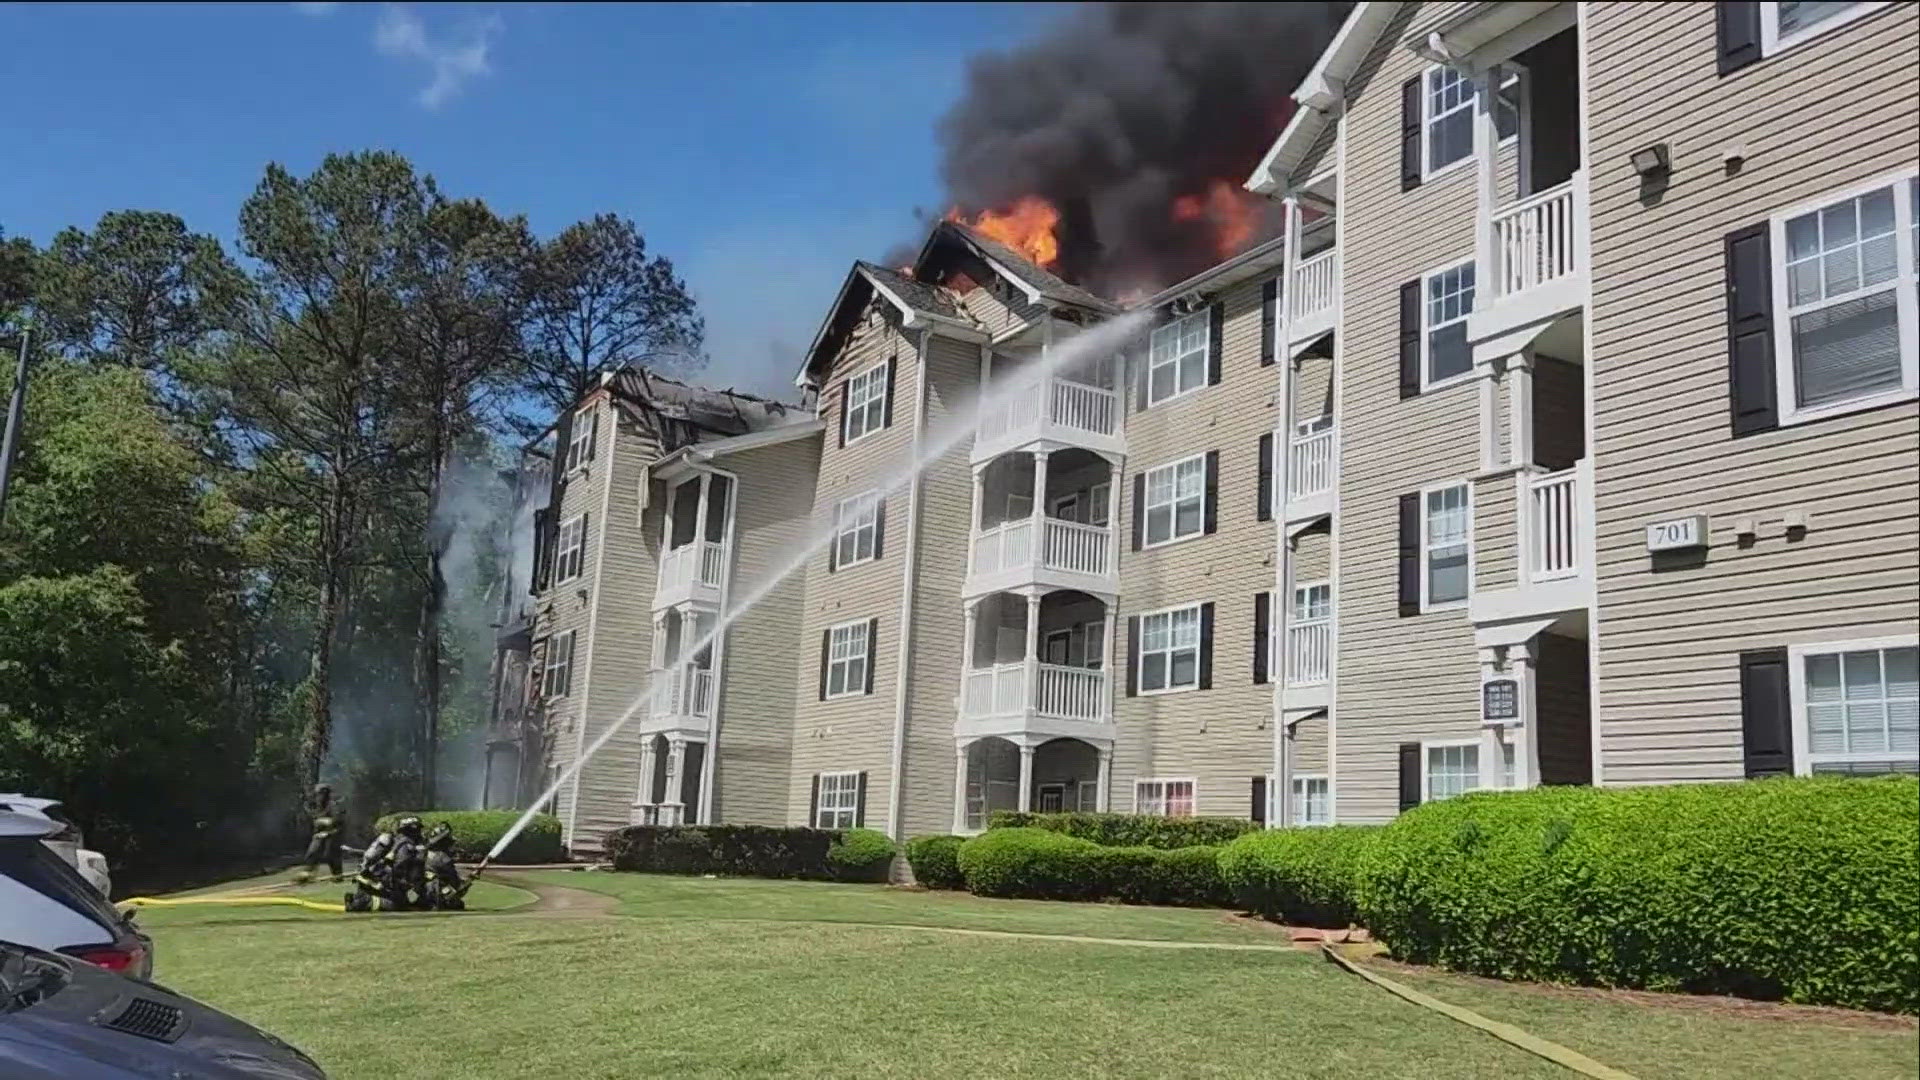 Firefighters respond to large fire at Woodstock apartment complex